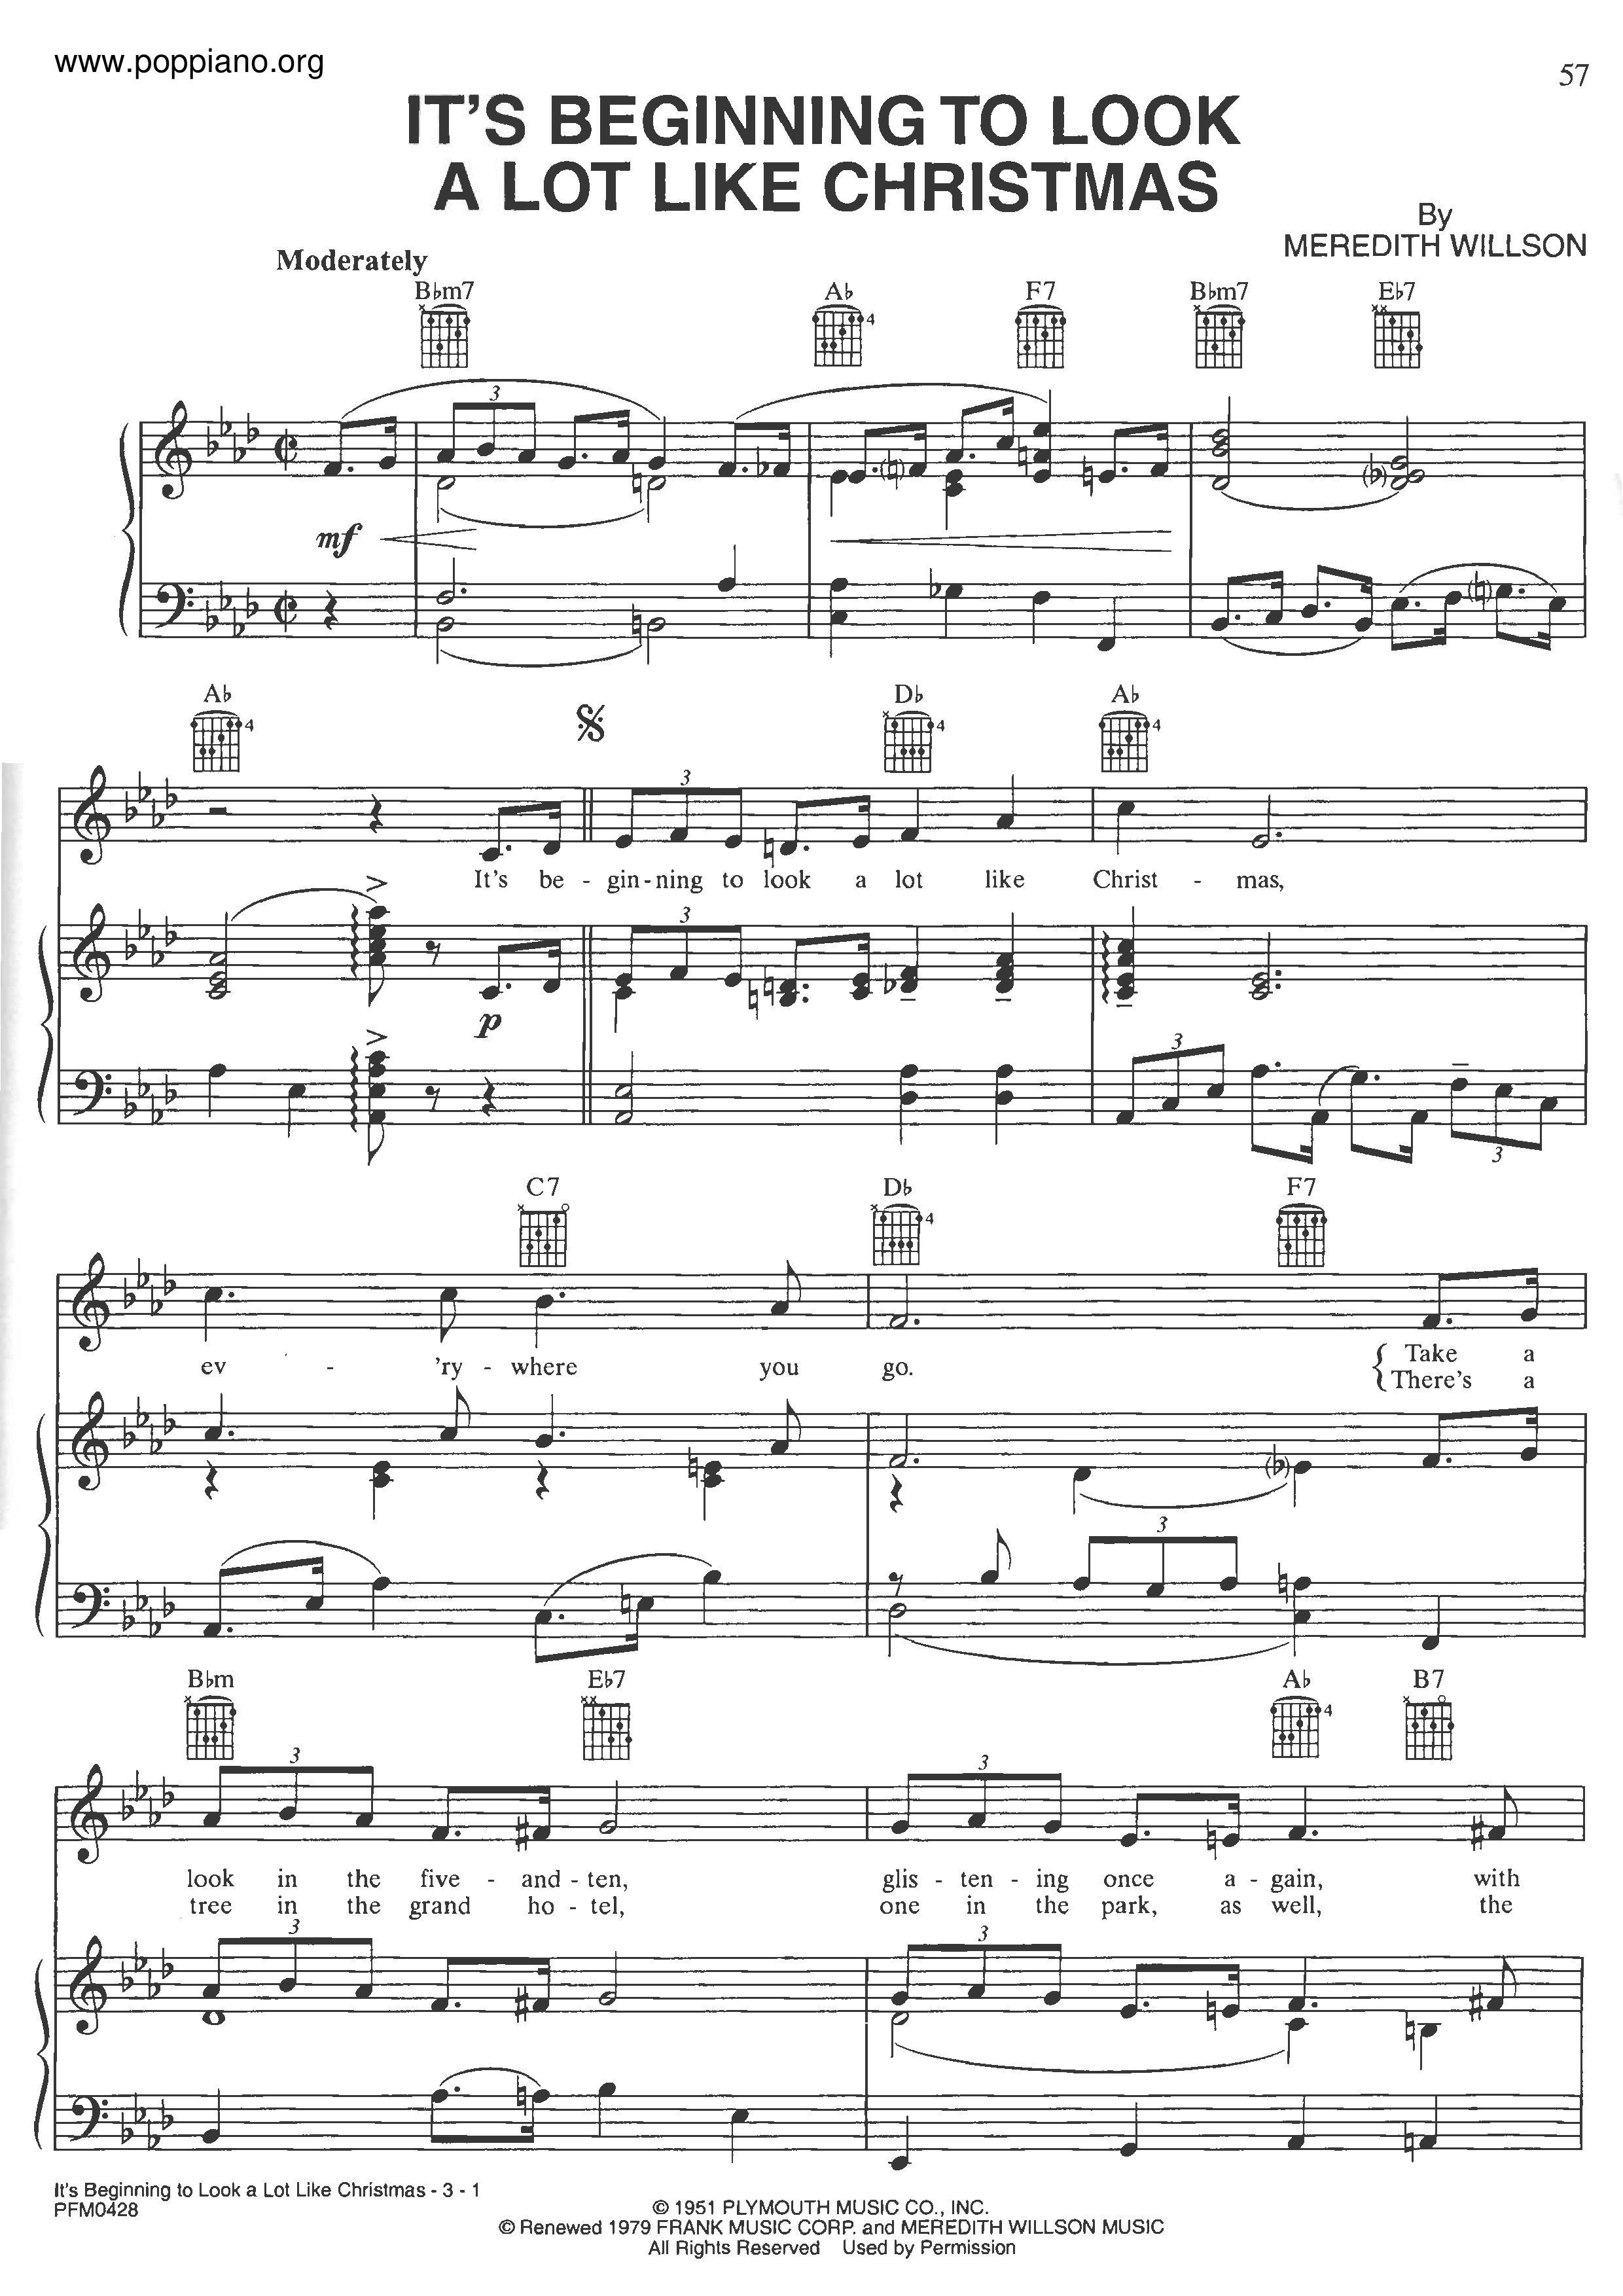 Michael Buble It S Beginning To Look A Lot Like Christmas Sheet Music Pdf Free Score Download ★